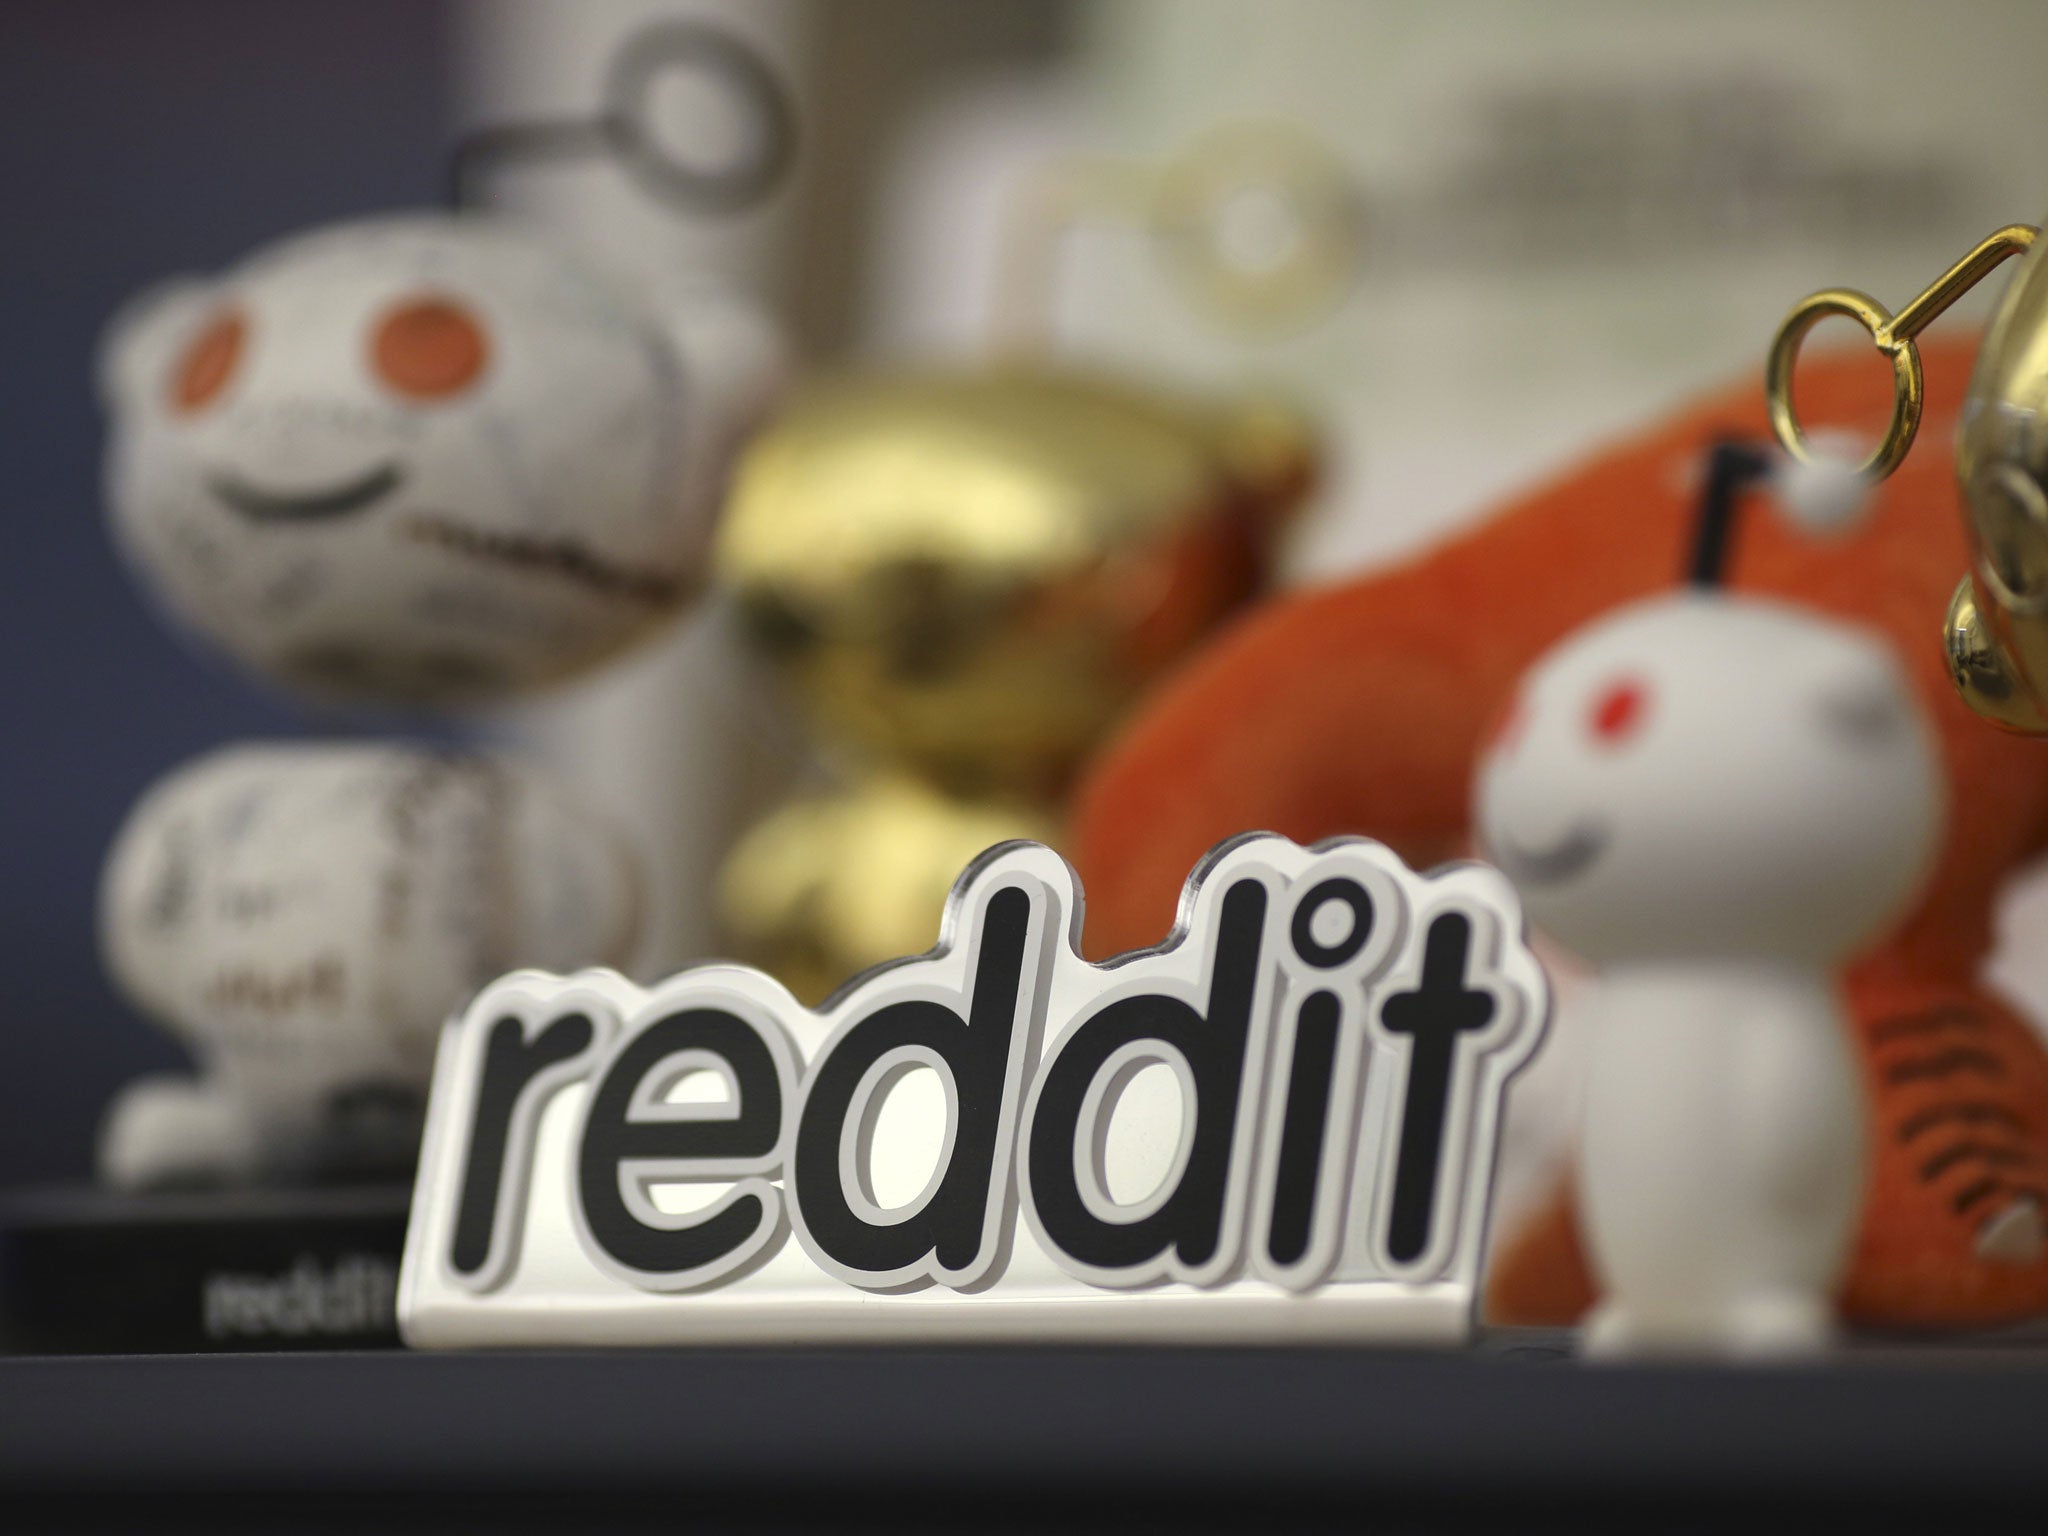 Reddit mascots are displayed at the company's headquarters in San Francisco, California